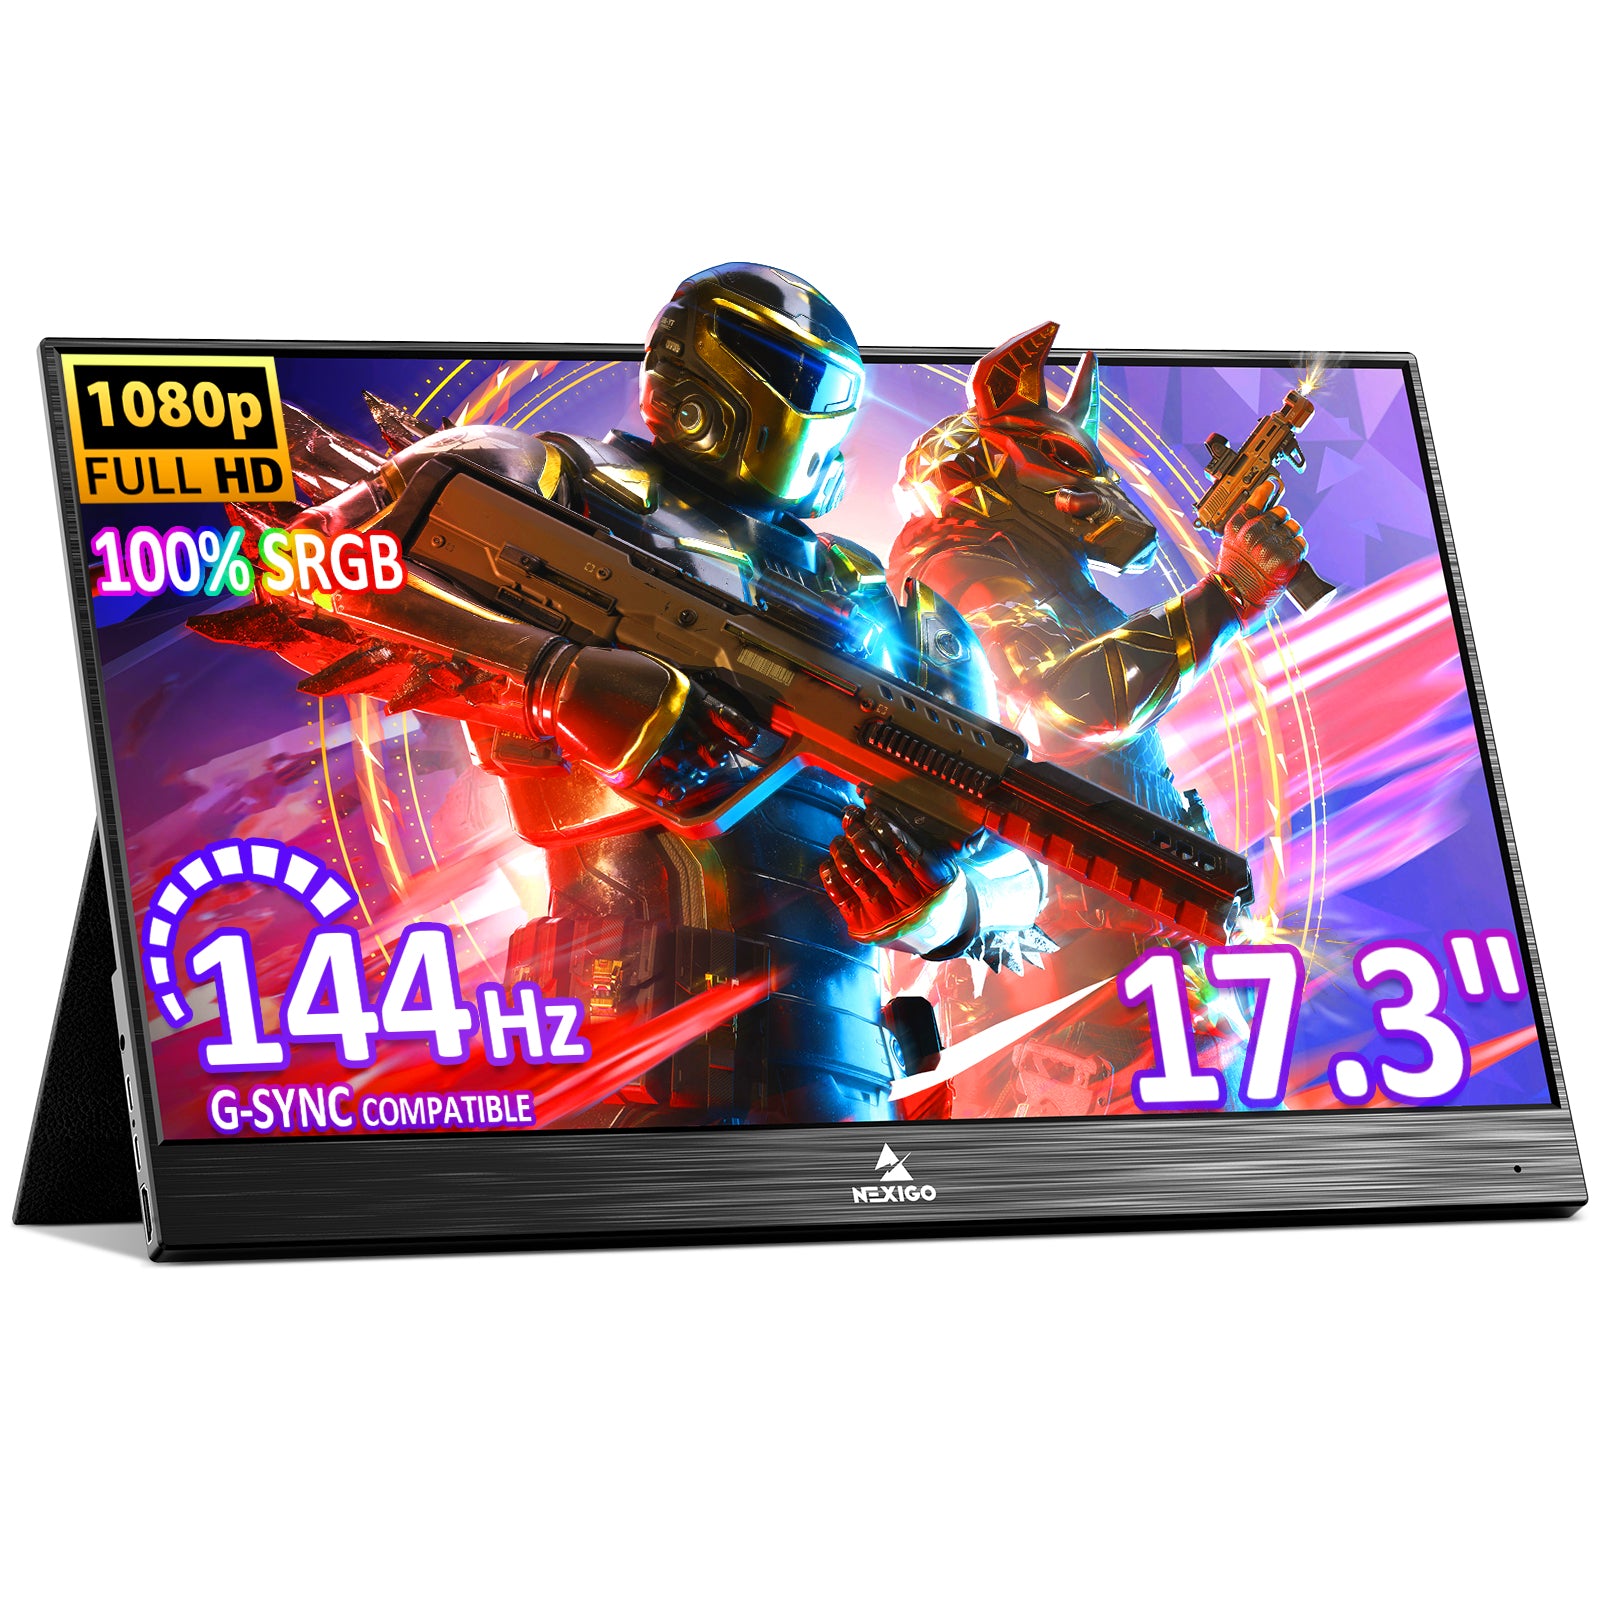 The NexiGo NG17FG 17.3 Inch 144Hz Portable Monitor is compatible with G-SYNC.